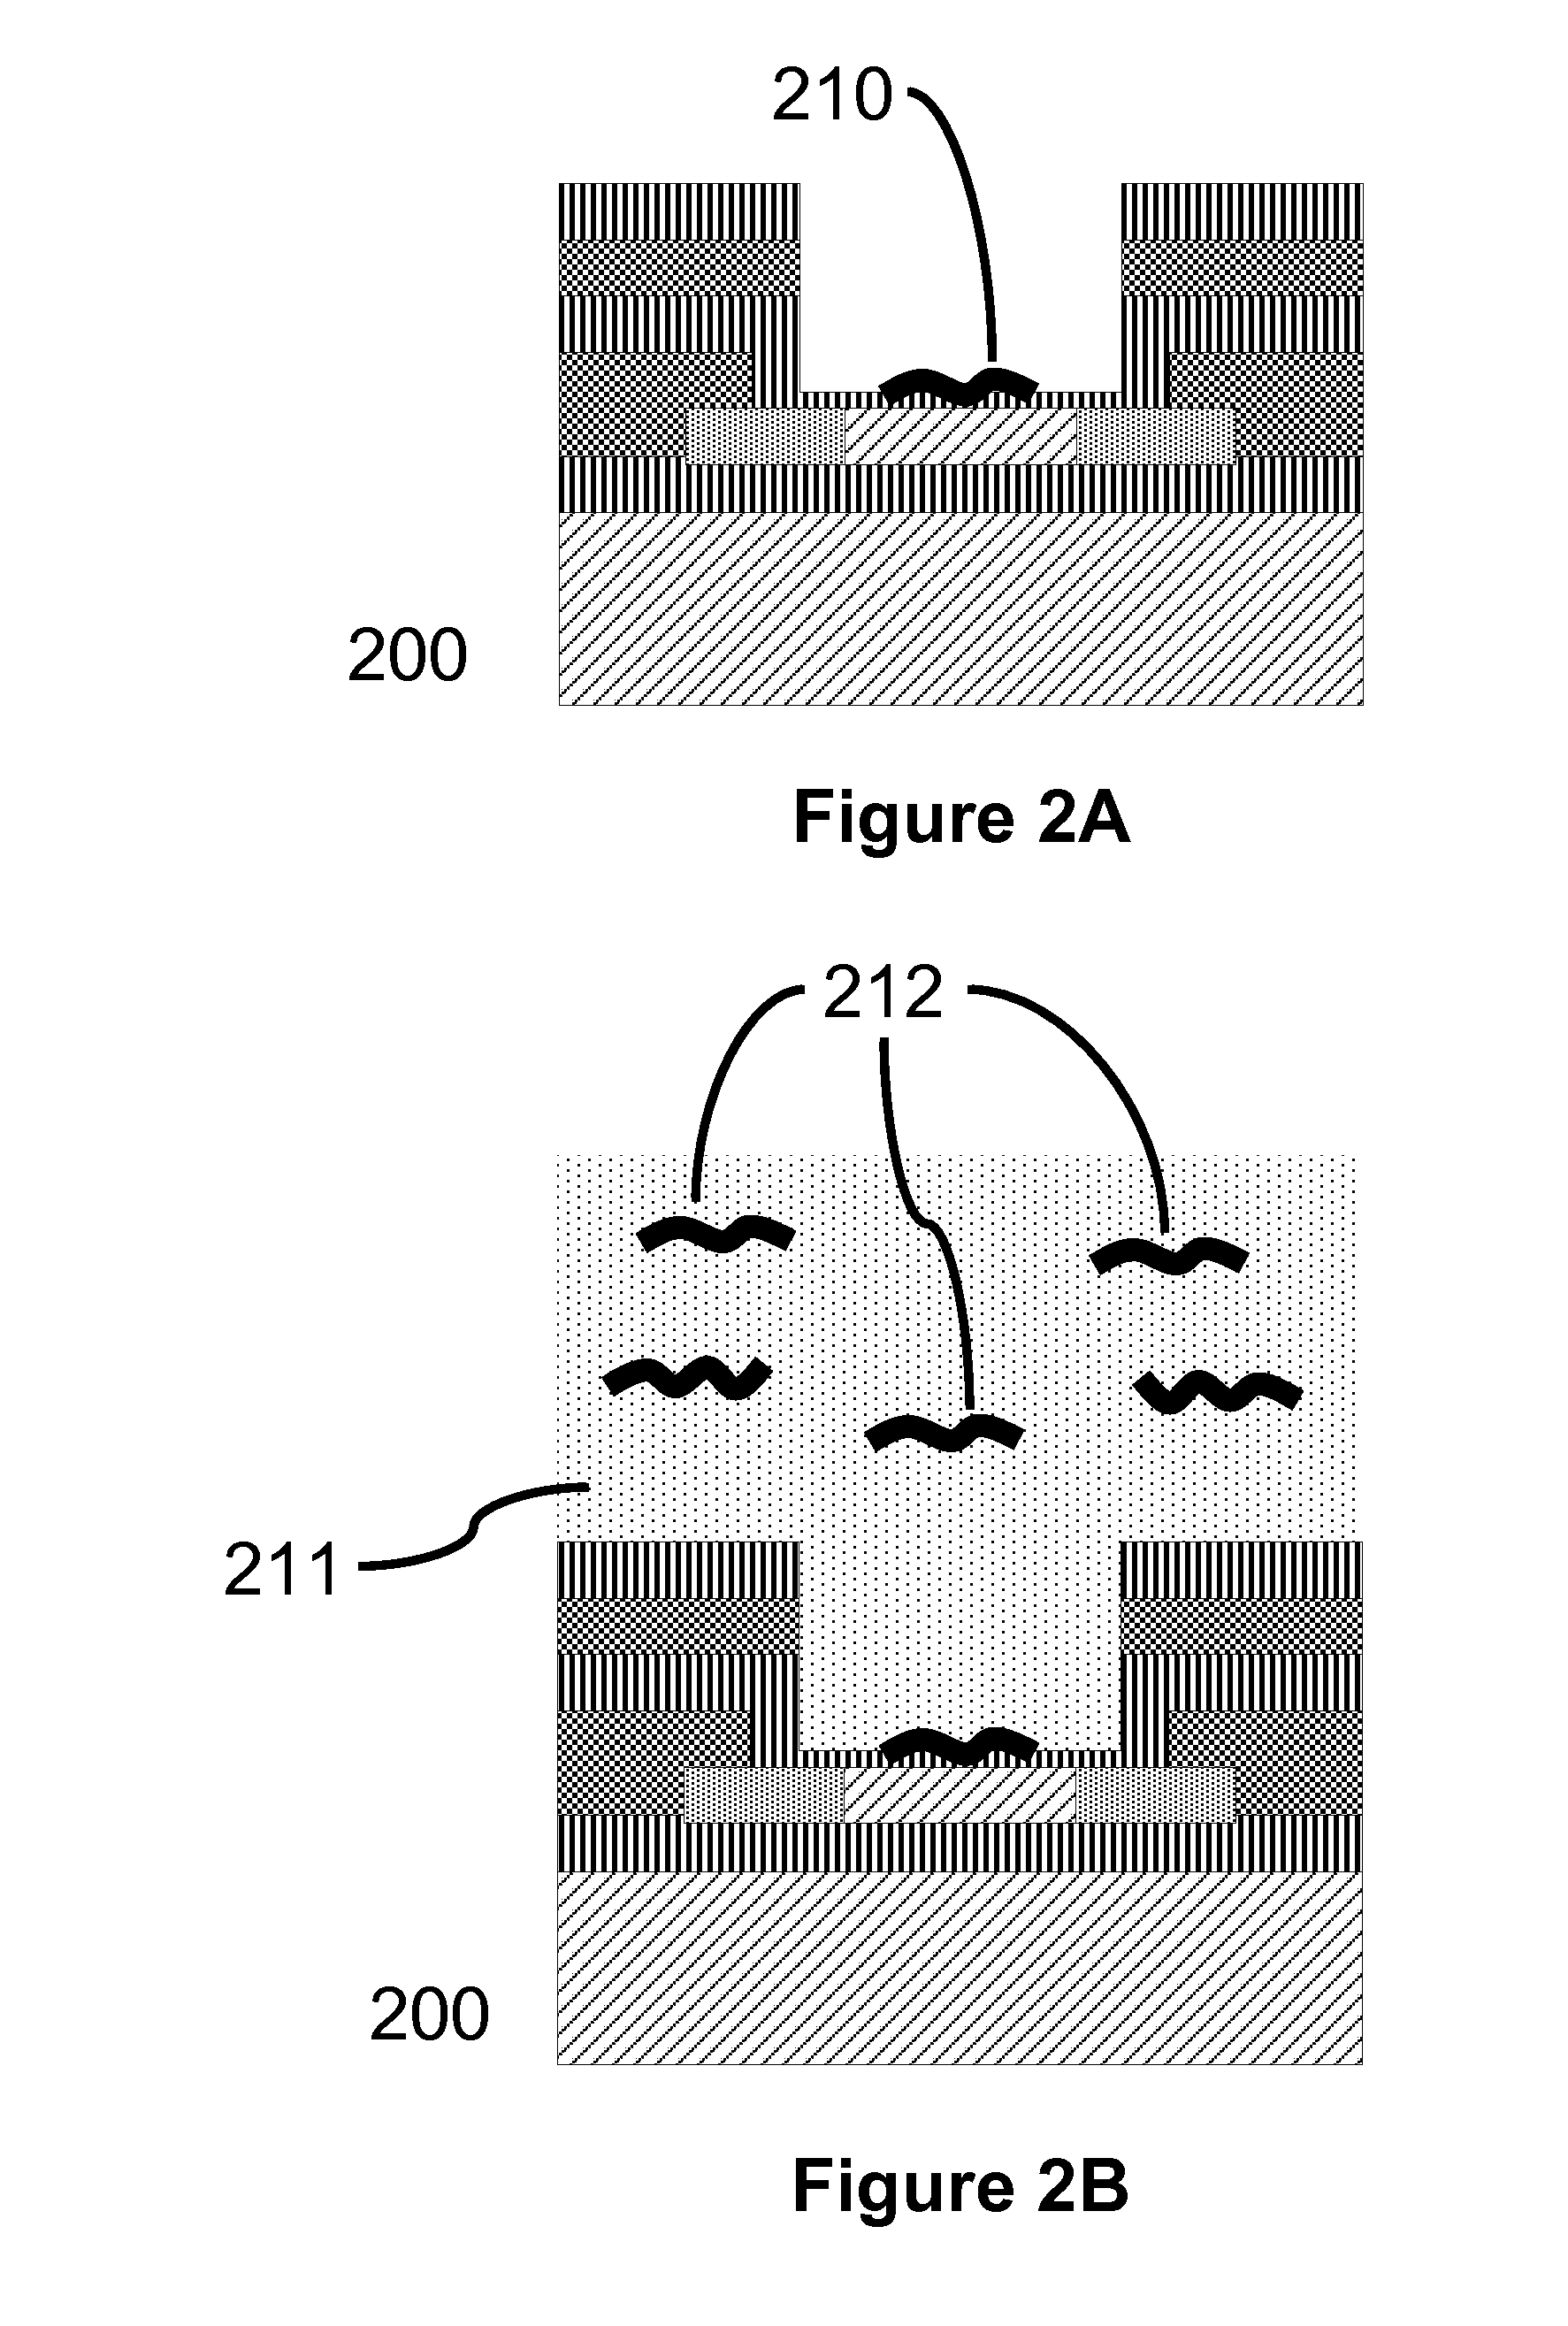 DNA Sequencing and Amplification Systems Using Nanoscale Field Effect Sensor Arrays